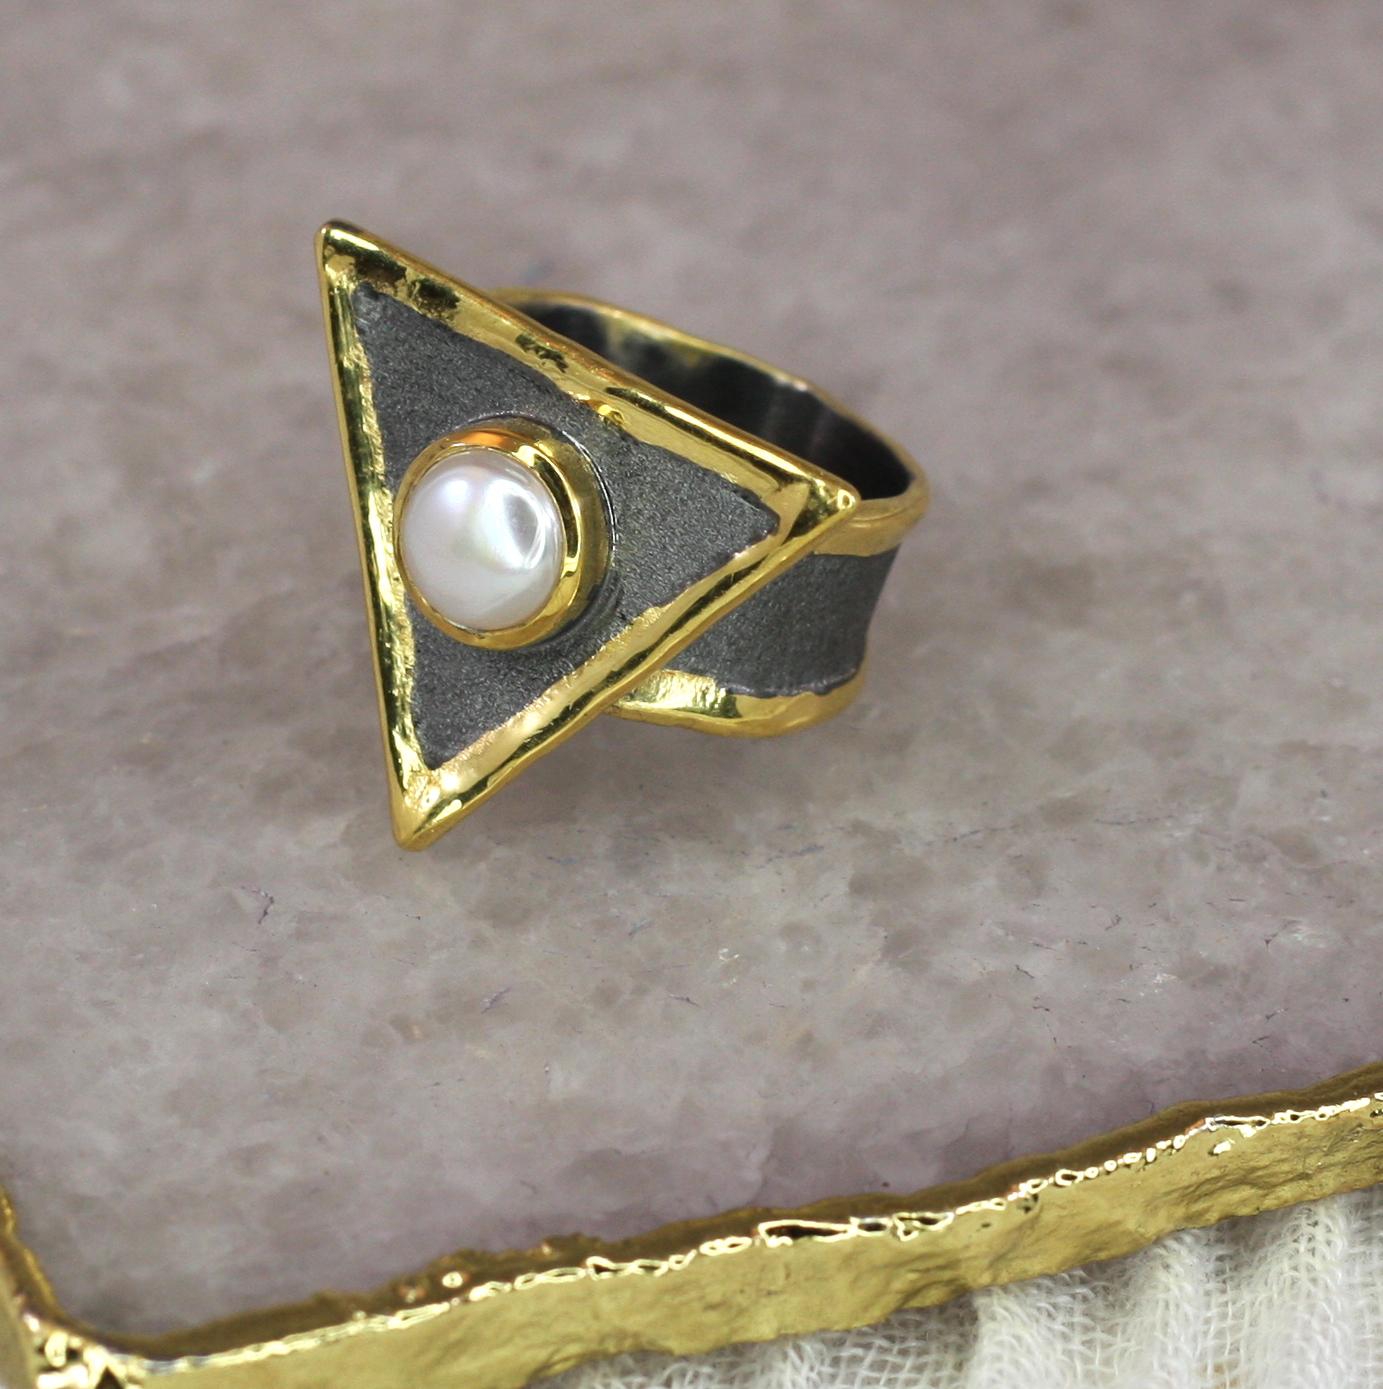 This 8 mm freshwater pearl ring from Yianni Creations is a unique ring handcrafted in Greece from Fine Silver 950 purity and plated with palladium to resist the elements. This triangular ring is finished with black rhodium and the edges are